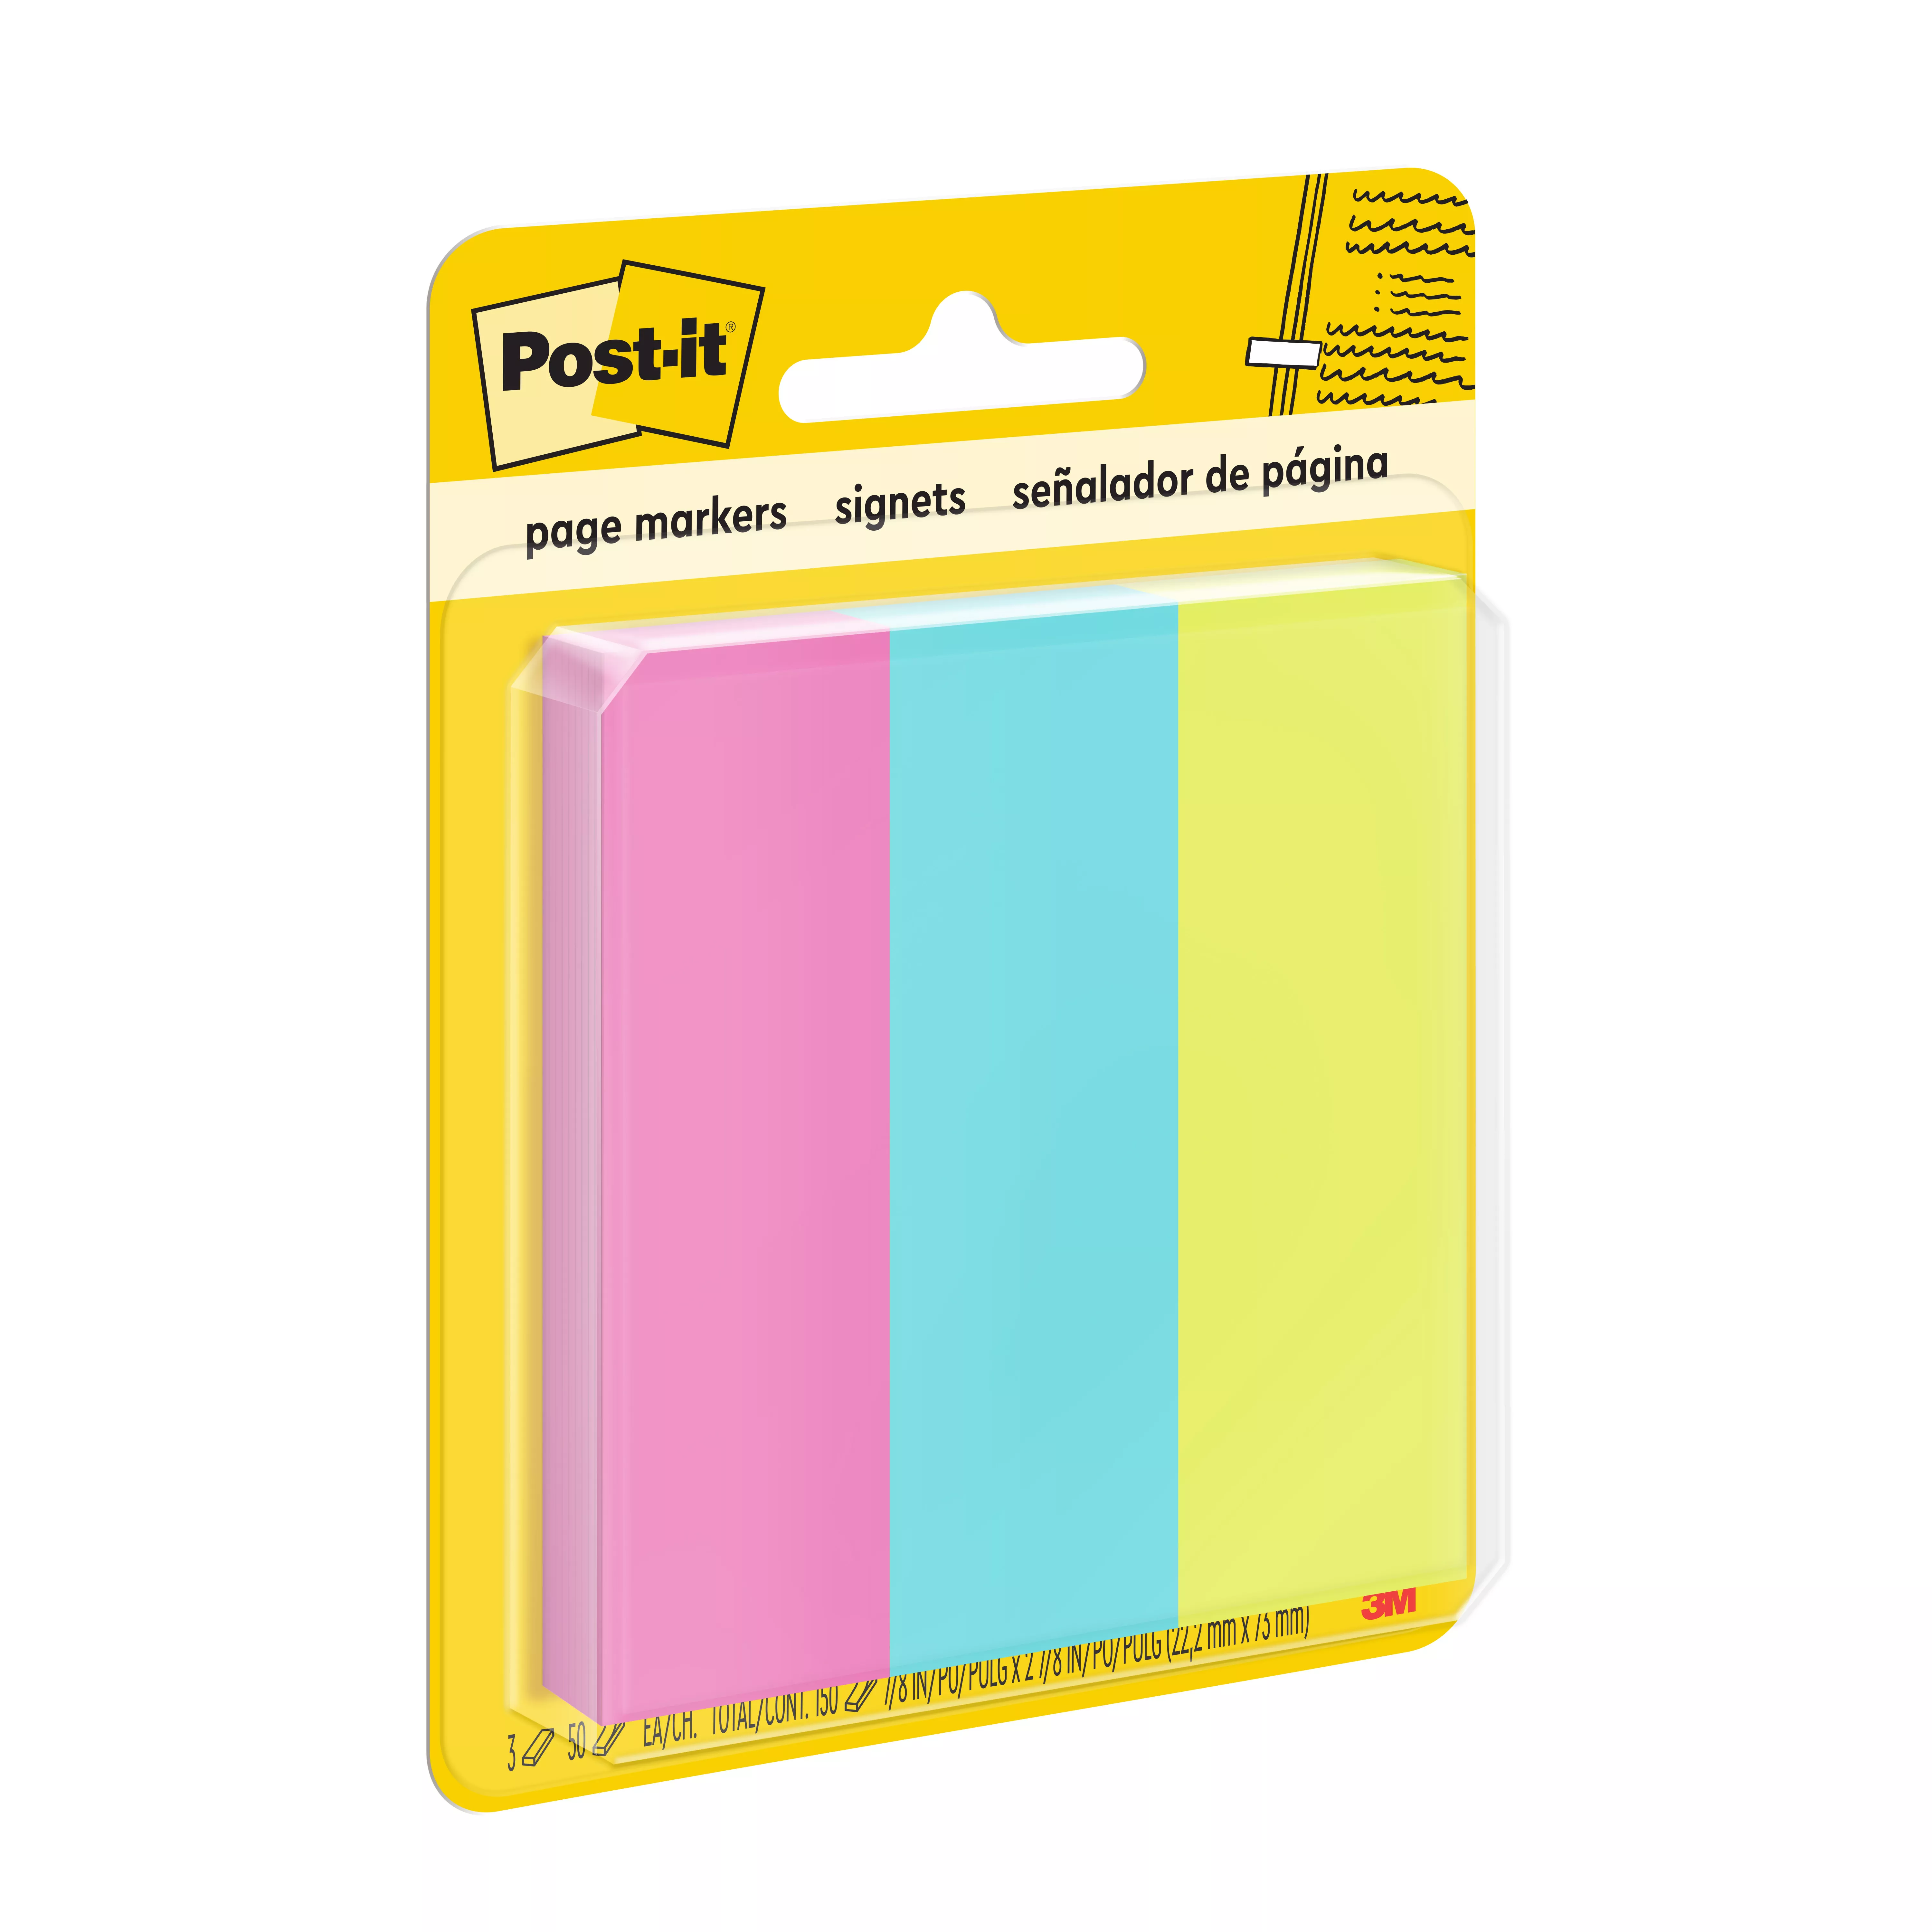 Product Number 5223 | Post-it® Page Markers 5223